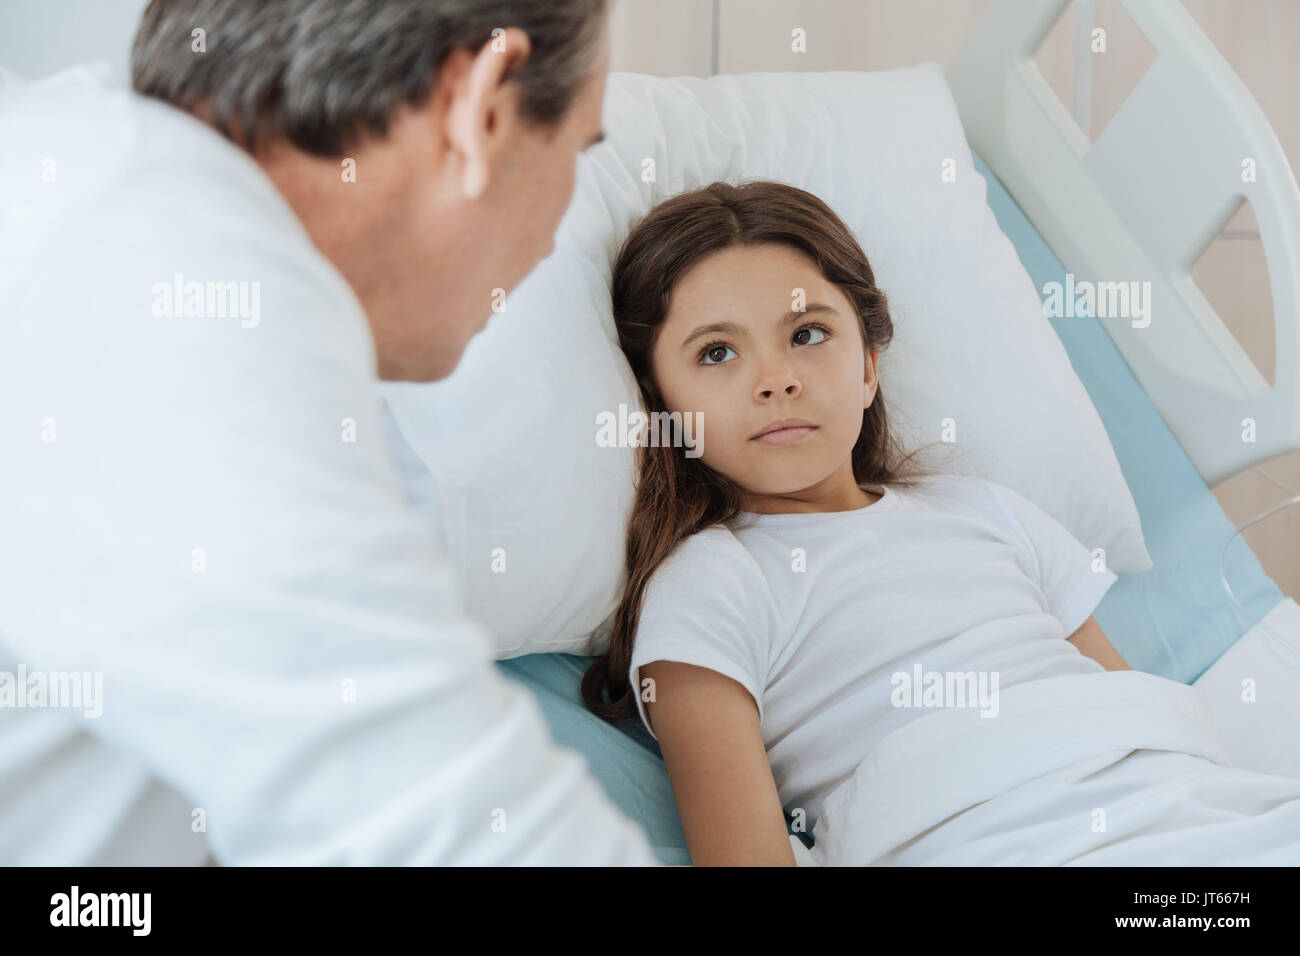 Cute young girl looking at her father Stock Photo